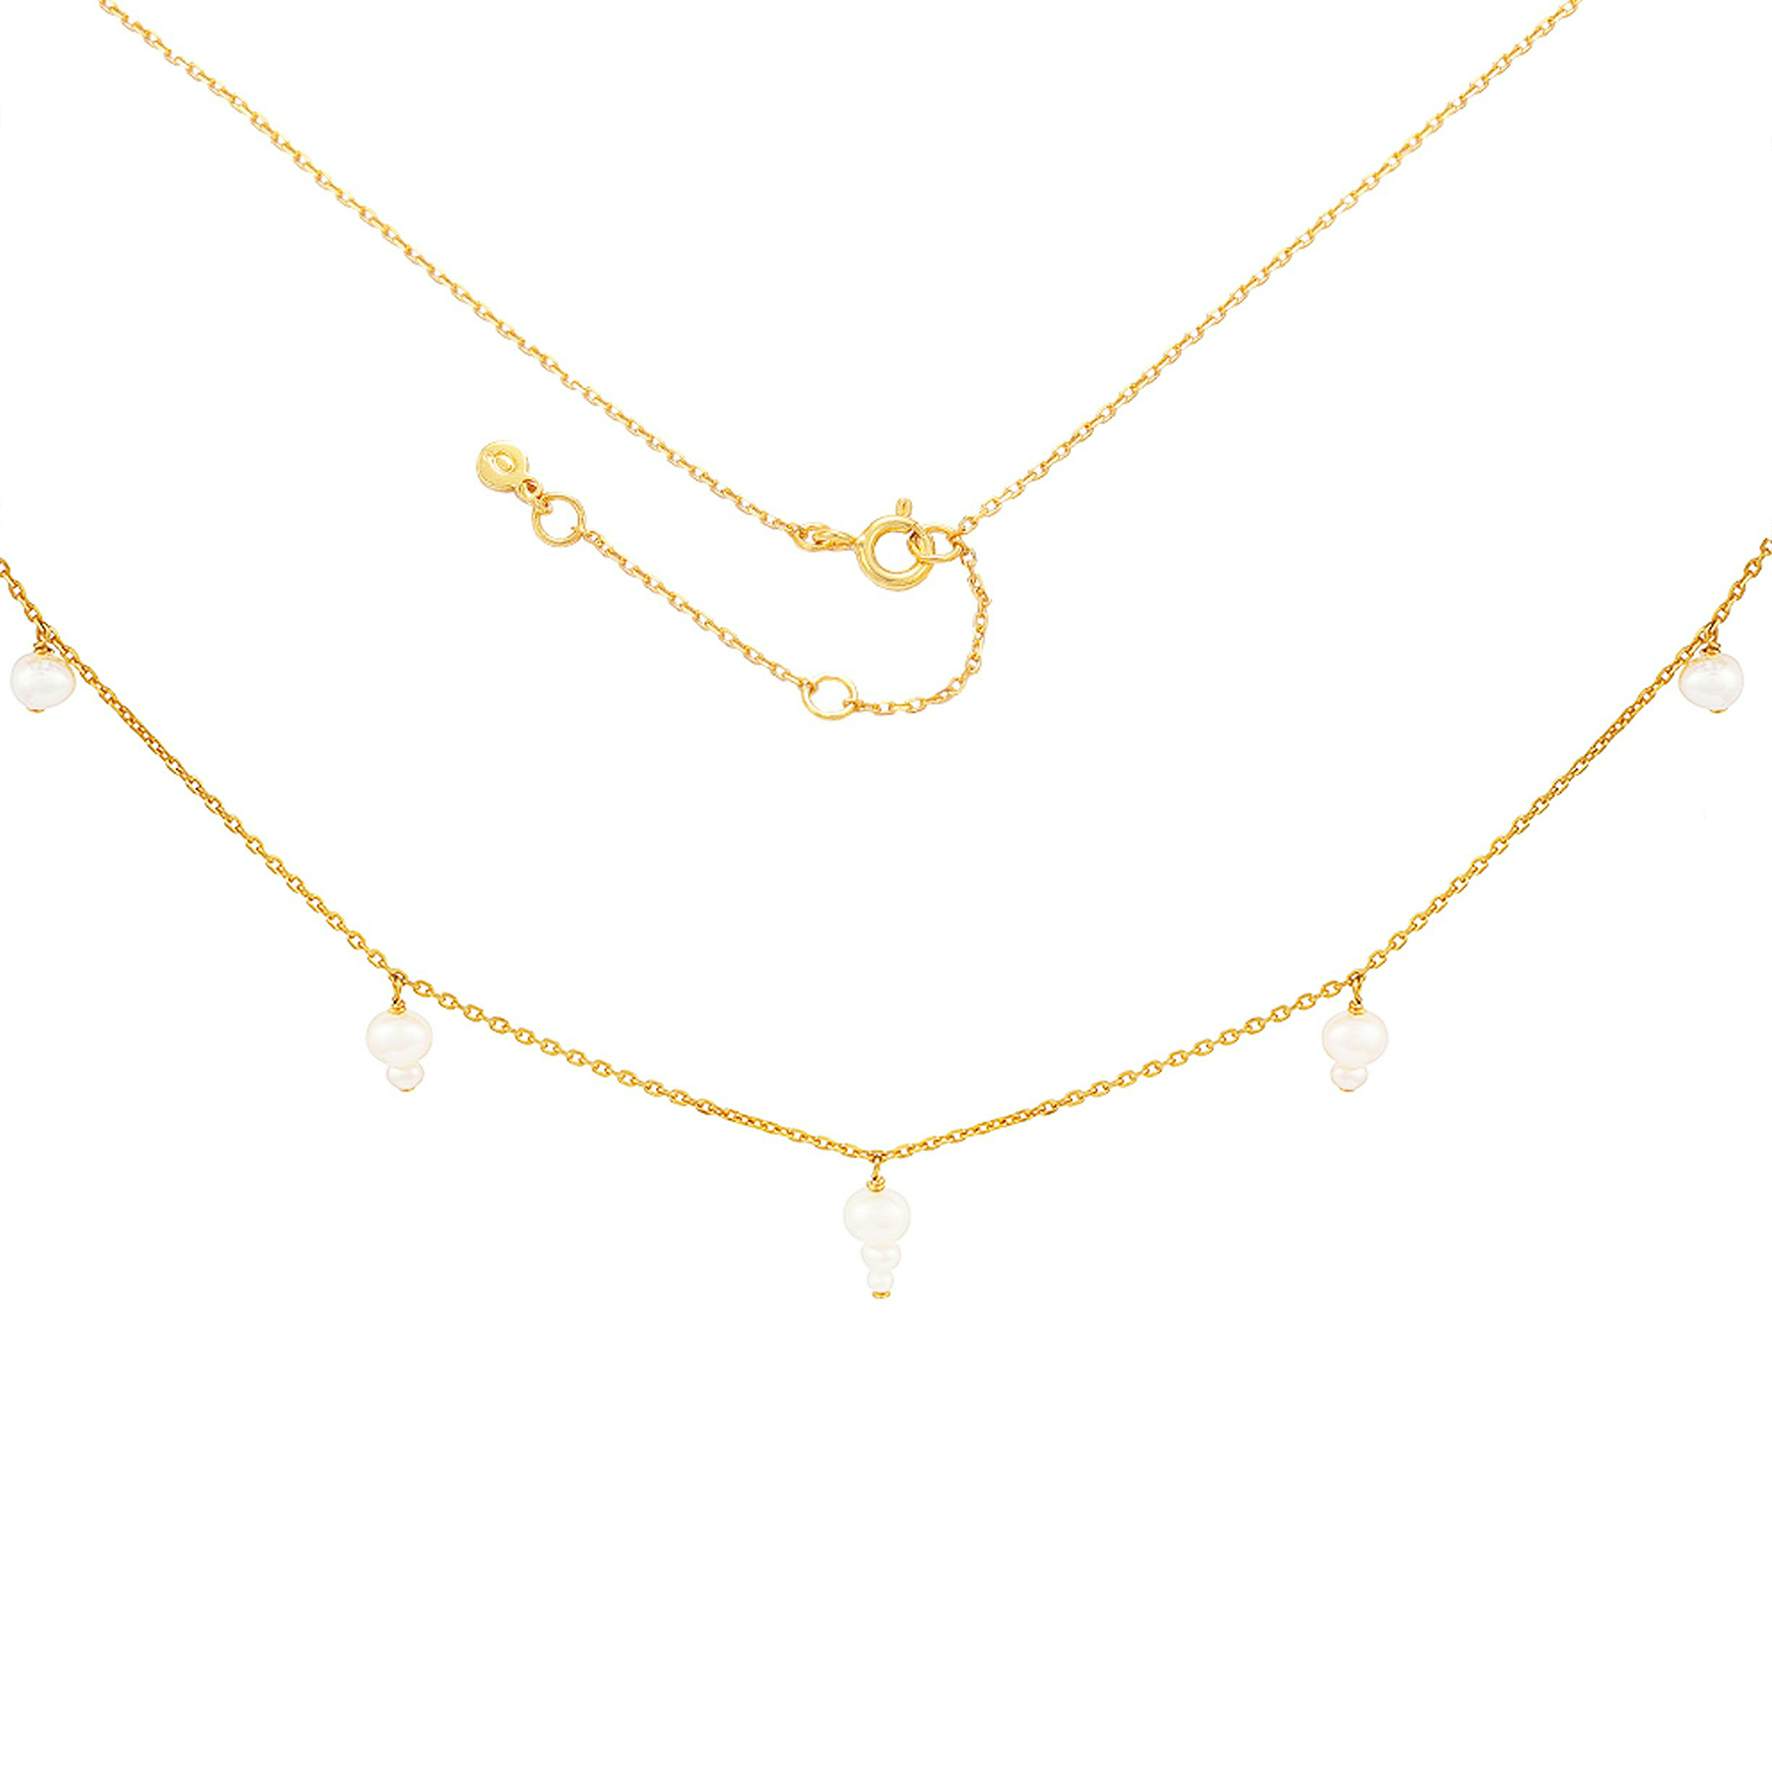 Esther Necklace from Hultquist Copenhagen in Goldplated-Silver Sterling 925